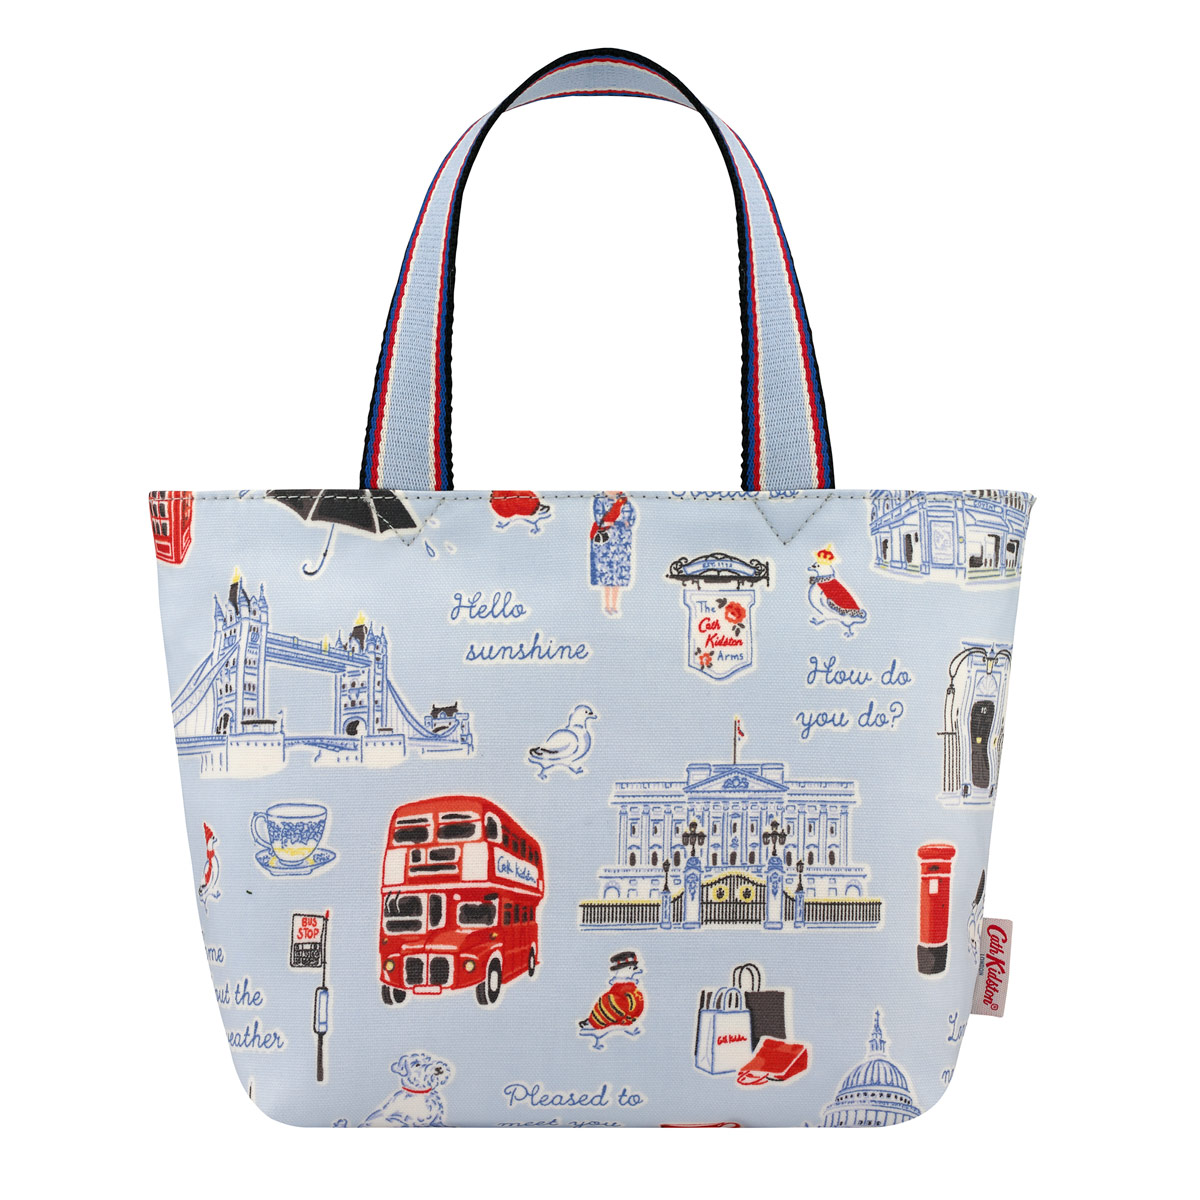 cath kidston lunch tote bag